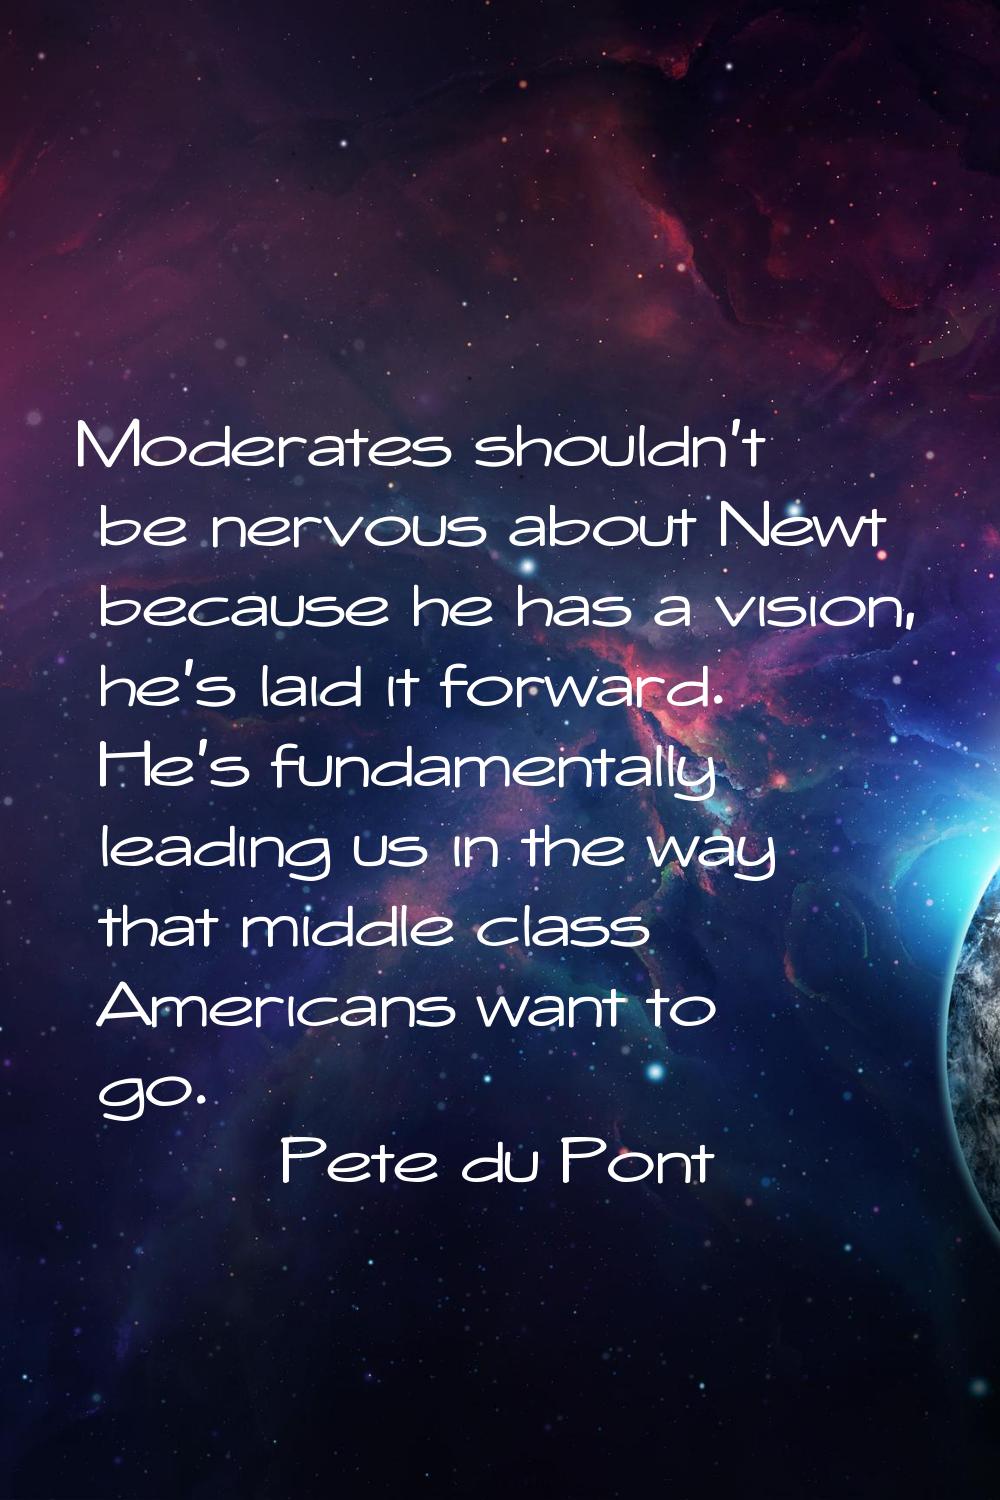 Moderates shouldn't be nervous about Newt because he has a vision, he's laid it forward. He's funda